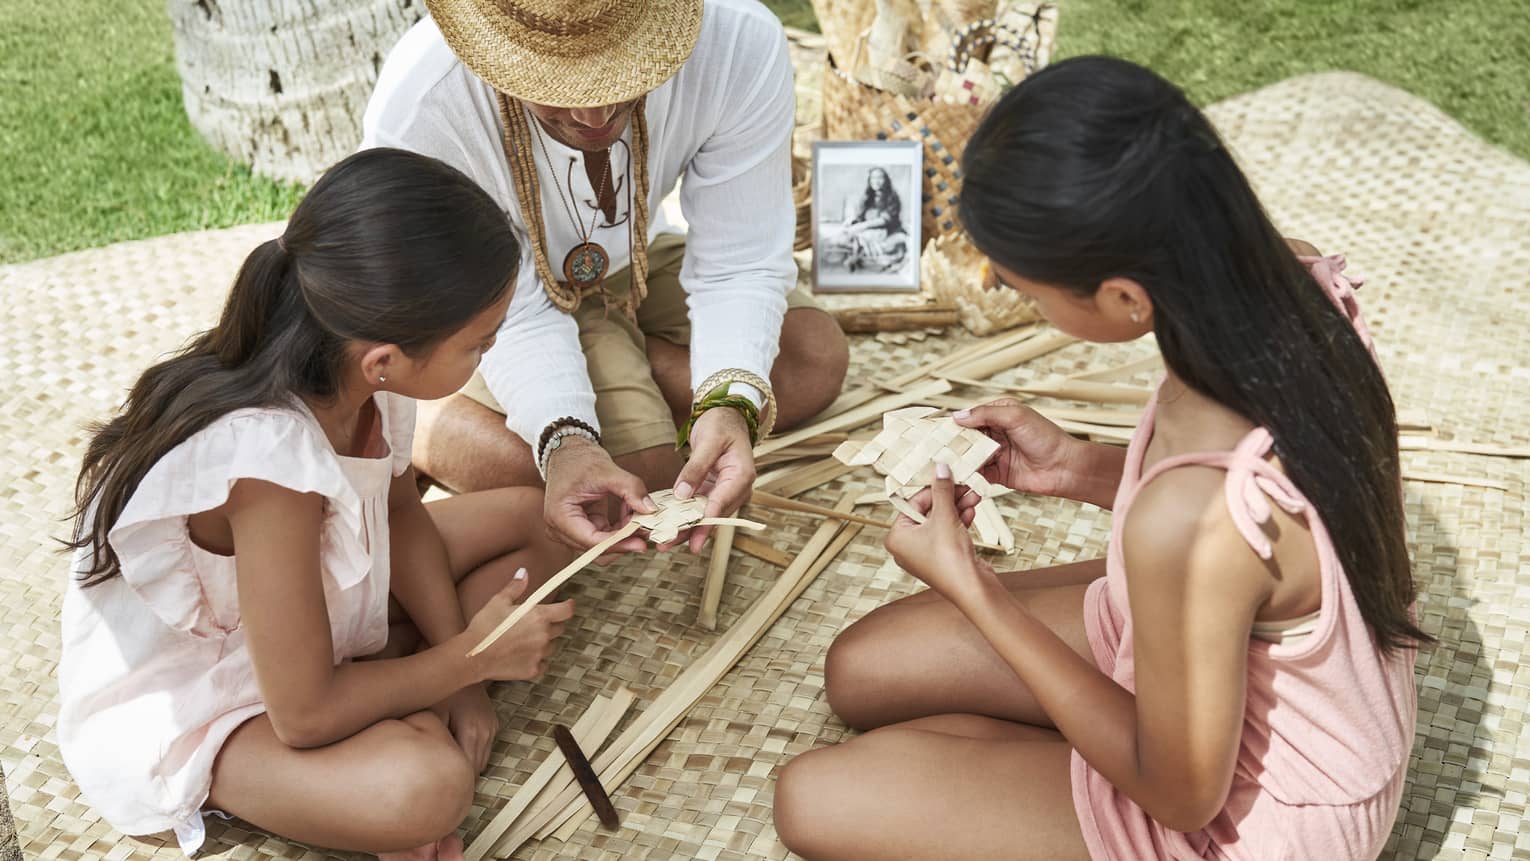 Adult helps two young girls learn how to weave as they sit on a woven blanket